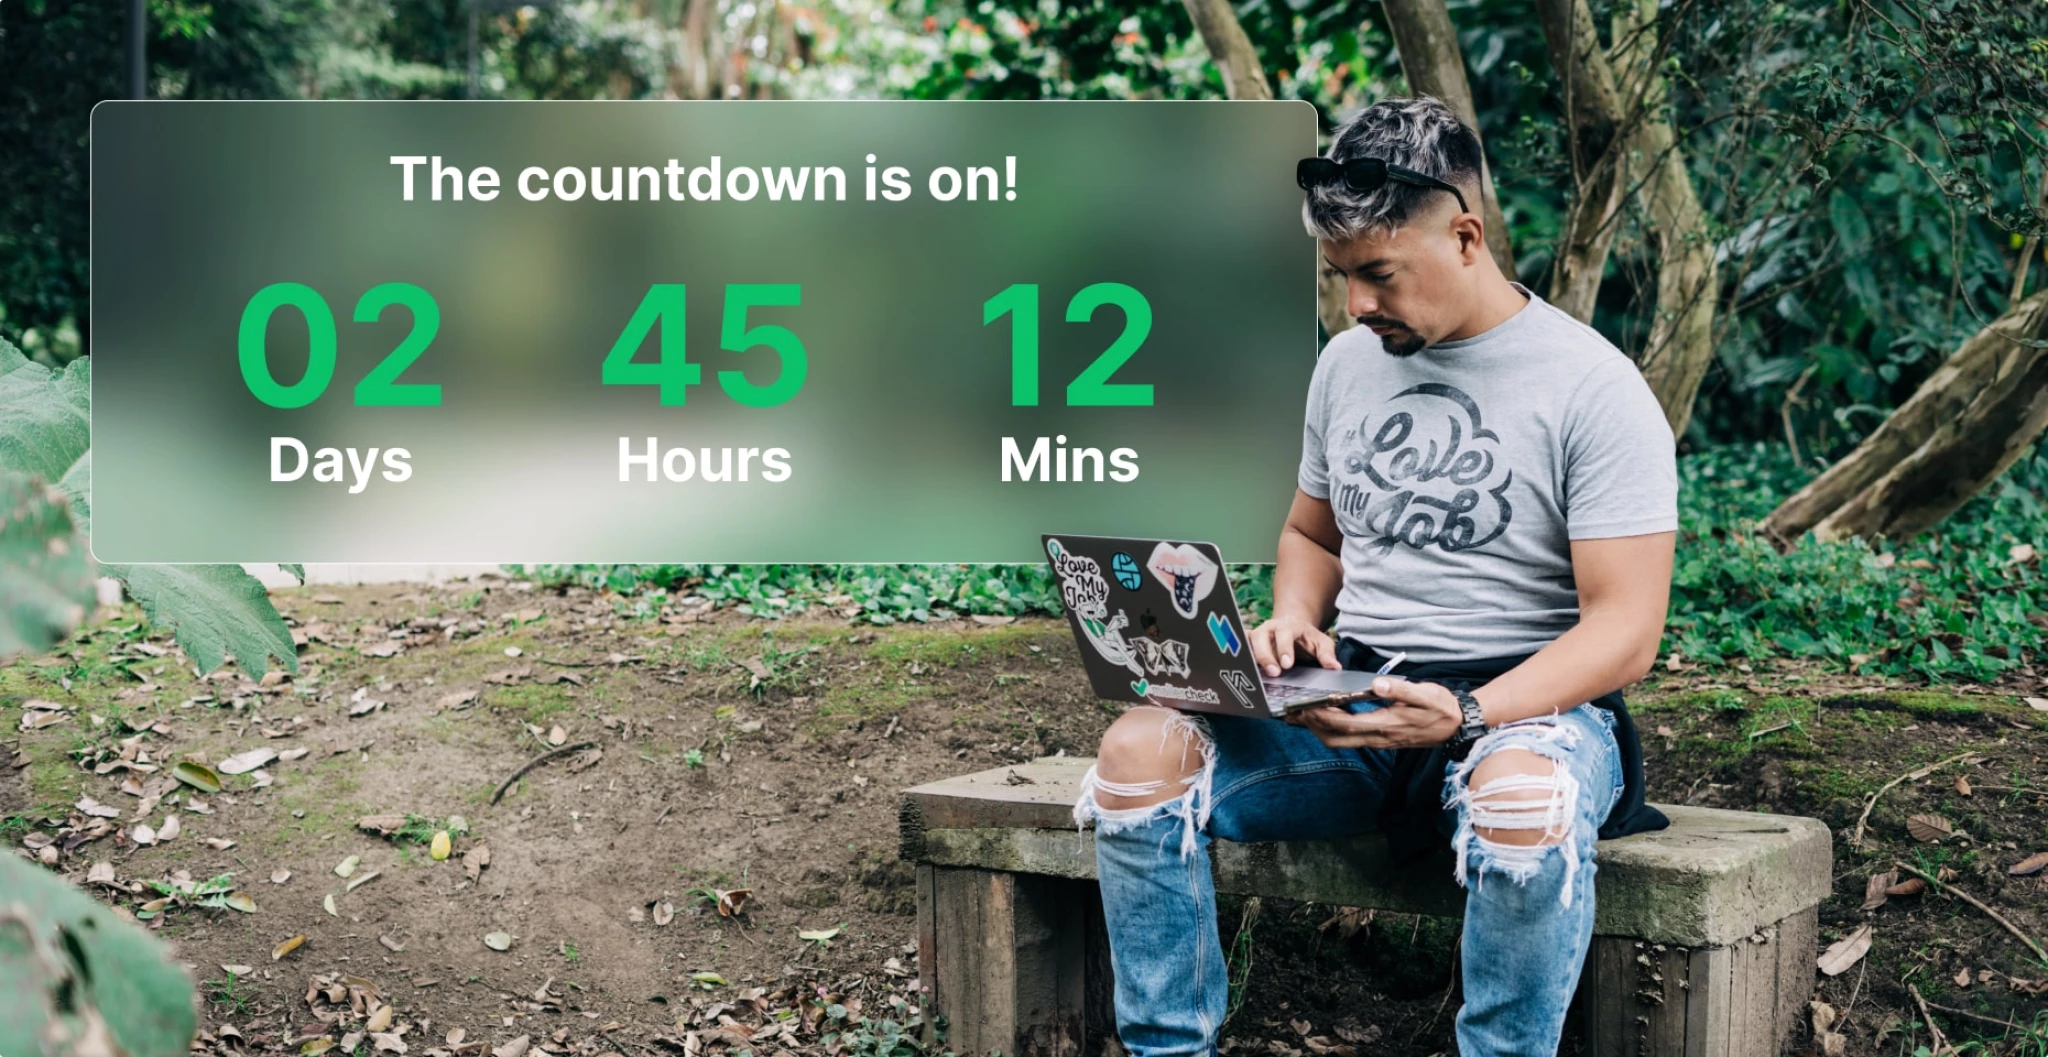 https://www.mailerlite.com/img/containers/assets/blog/11-Great-Ways-to-Use-an-Email-Countdown-Timer.jpg/8e05aff288e3a175c95706966b76dc8b.webp